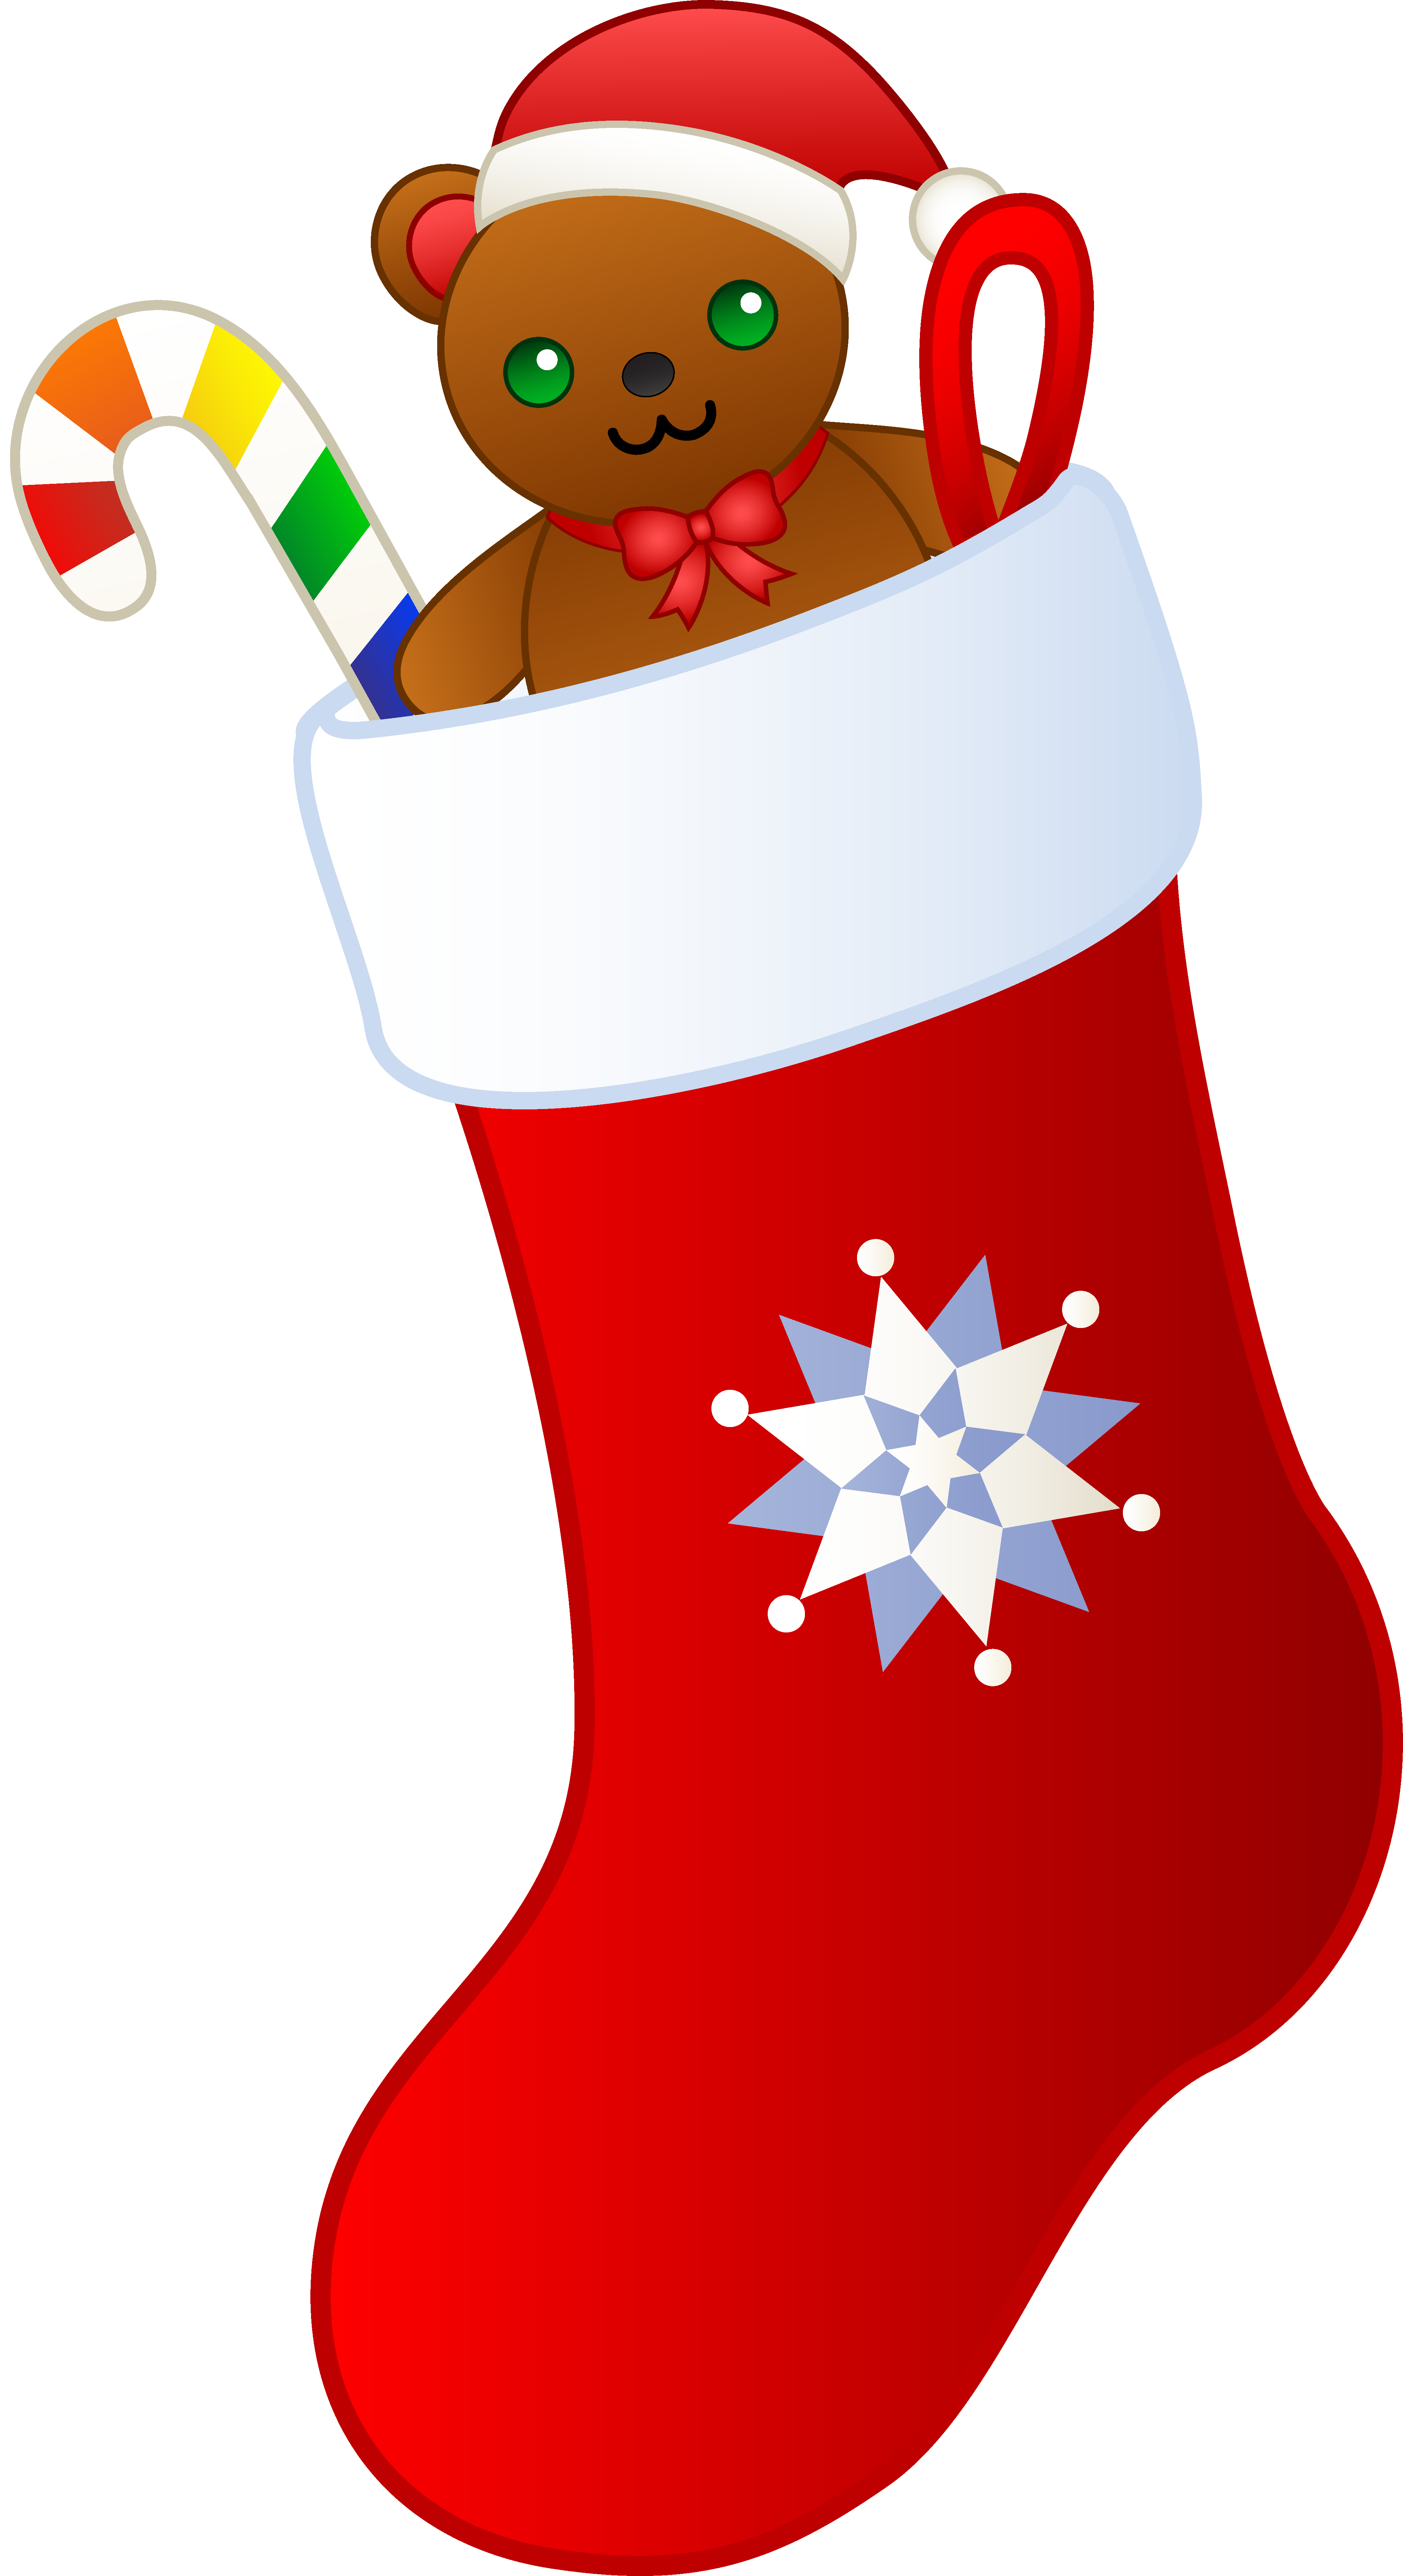 Christmas stocking filled with. Holiday clipart sweet